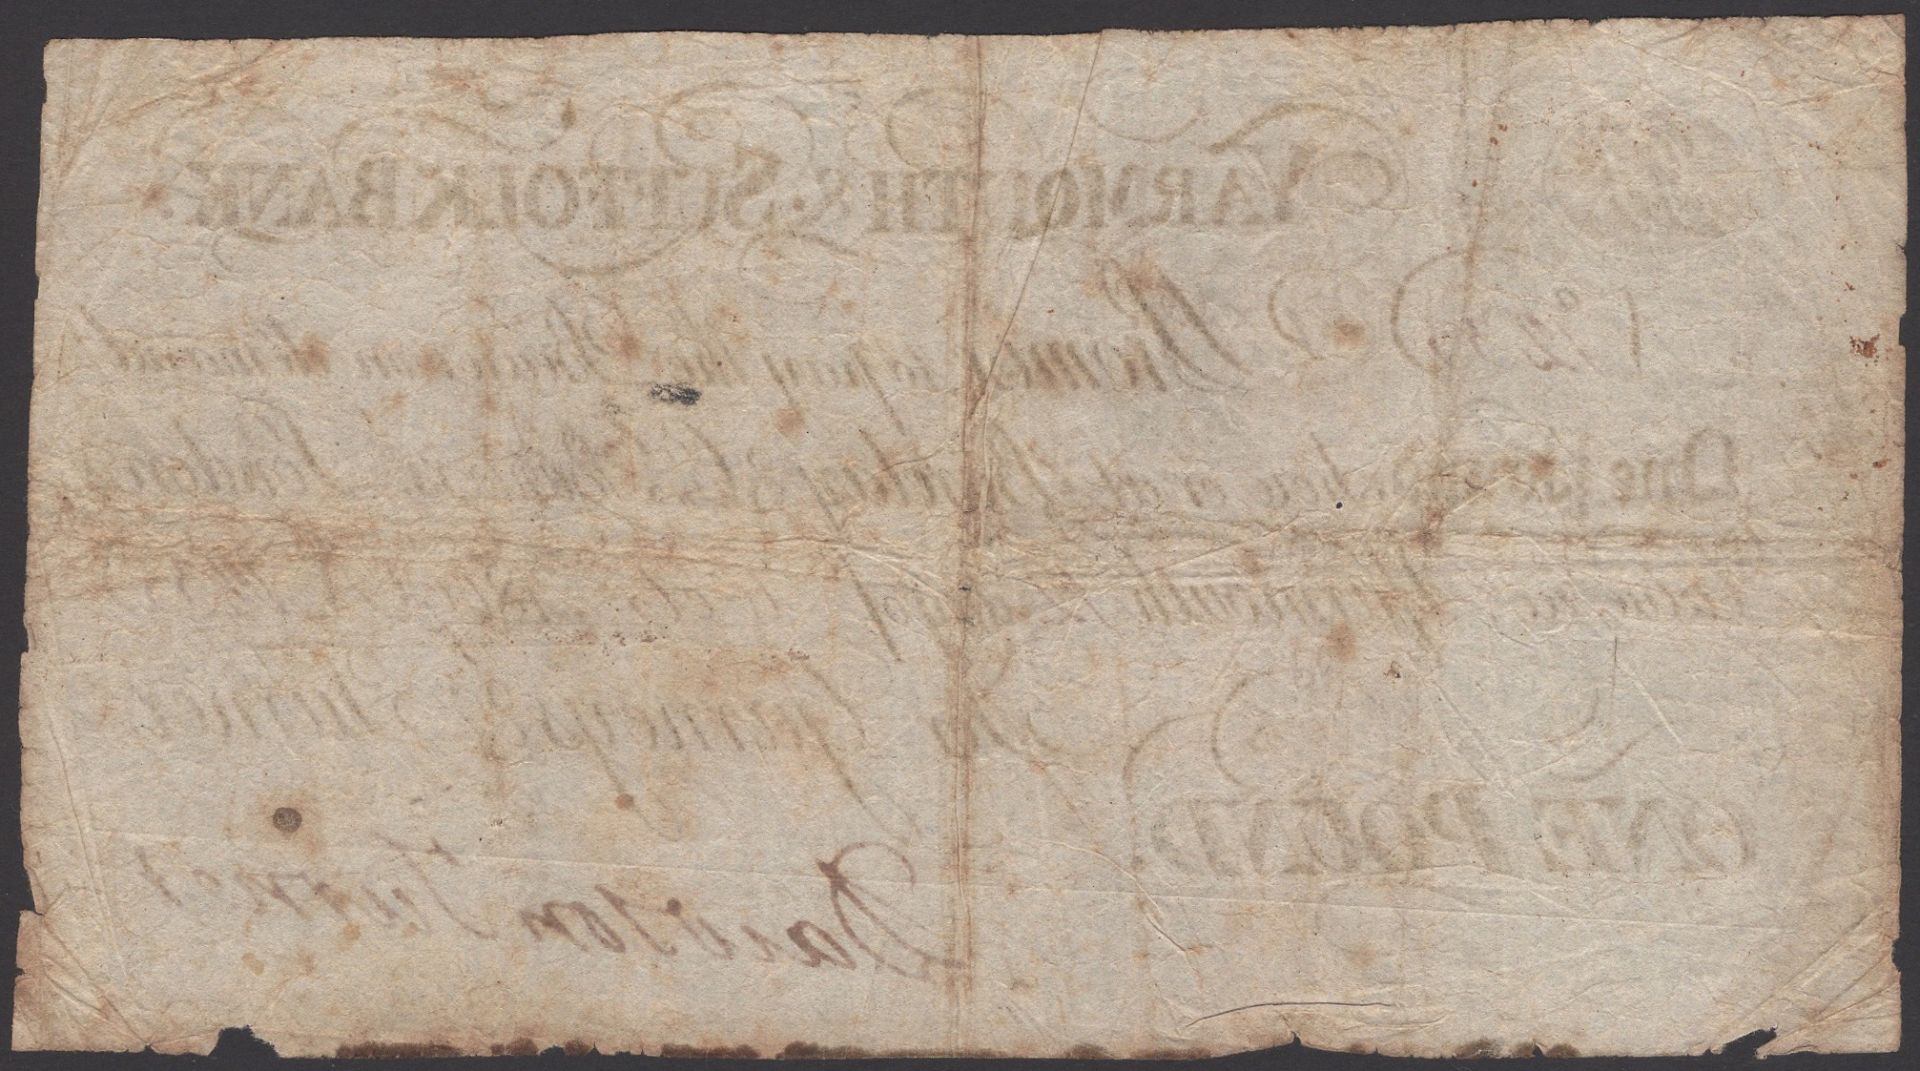 Yarmouth & Suffolk Bank, for Gurneys & Turner, Â£1, 12 October 1809, serial number 1235, Daws... - Image 2 of 2